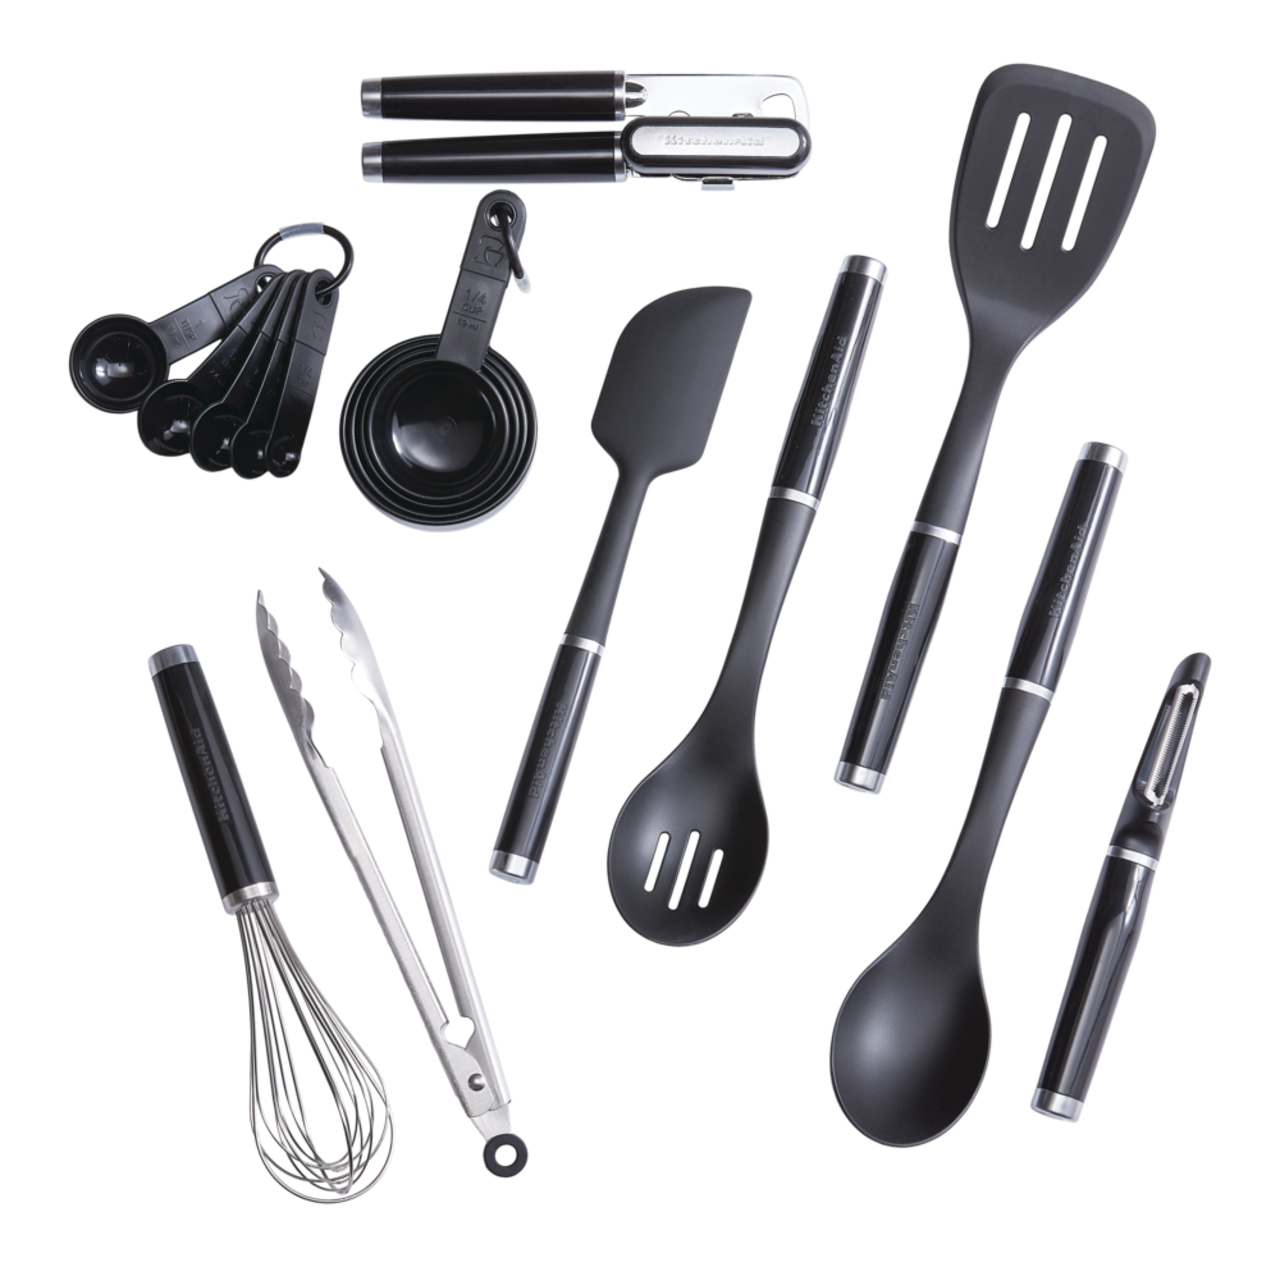 https://media-www.canadiantire.ca/product/living/kitchen/kitchen-tools-thermometers/1425821/ka-gourmet-17-piece-tool-set-aaa87e7f-7172-4c56-951e-4d99496b27e2.png?imdensity=1&imwidth=1244&impolicy=mZoom